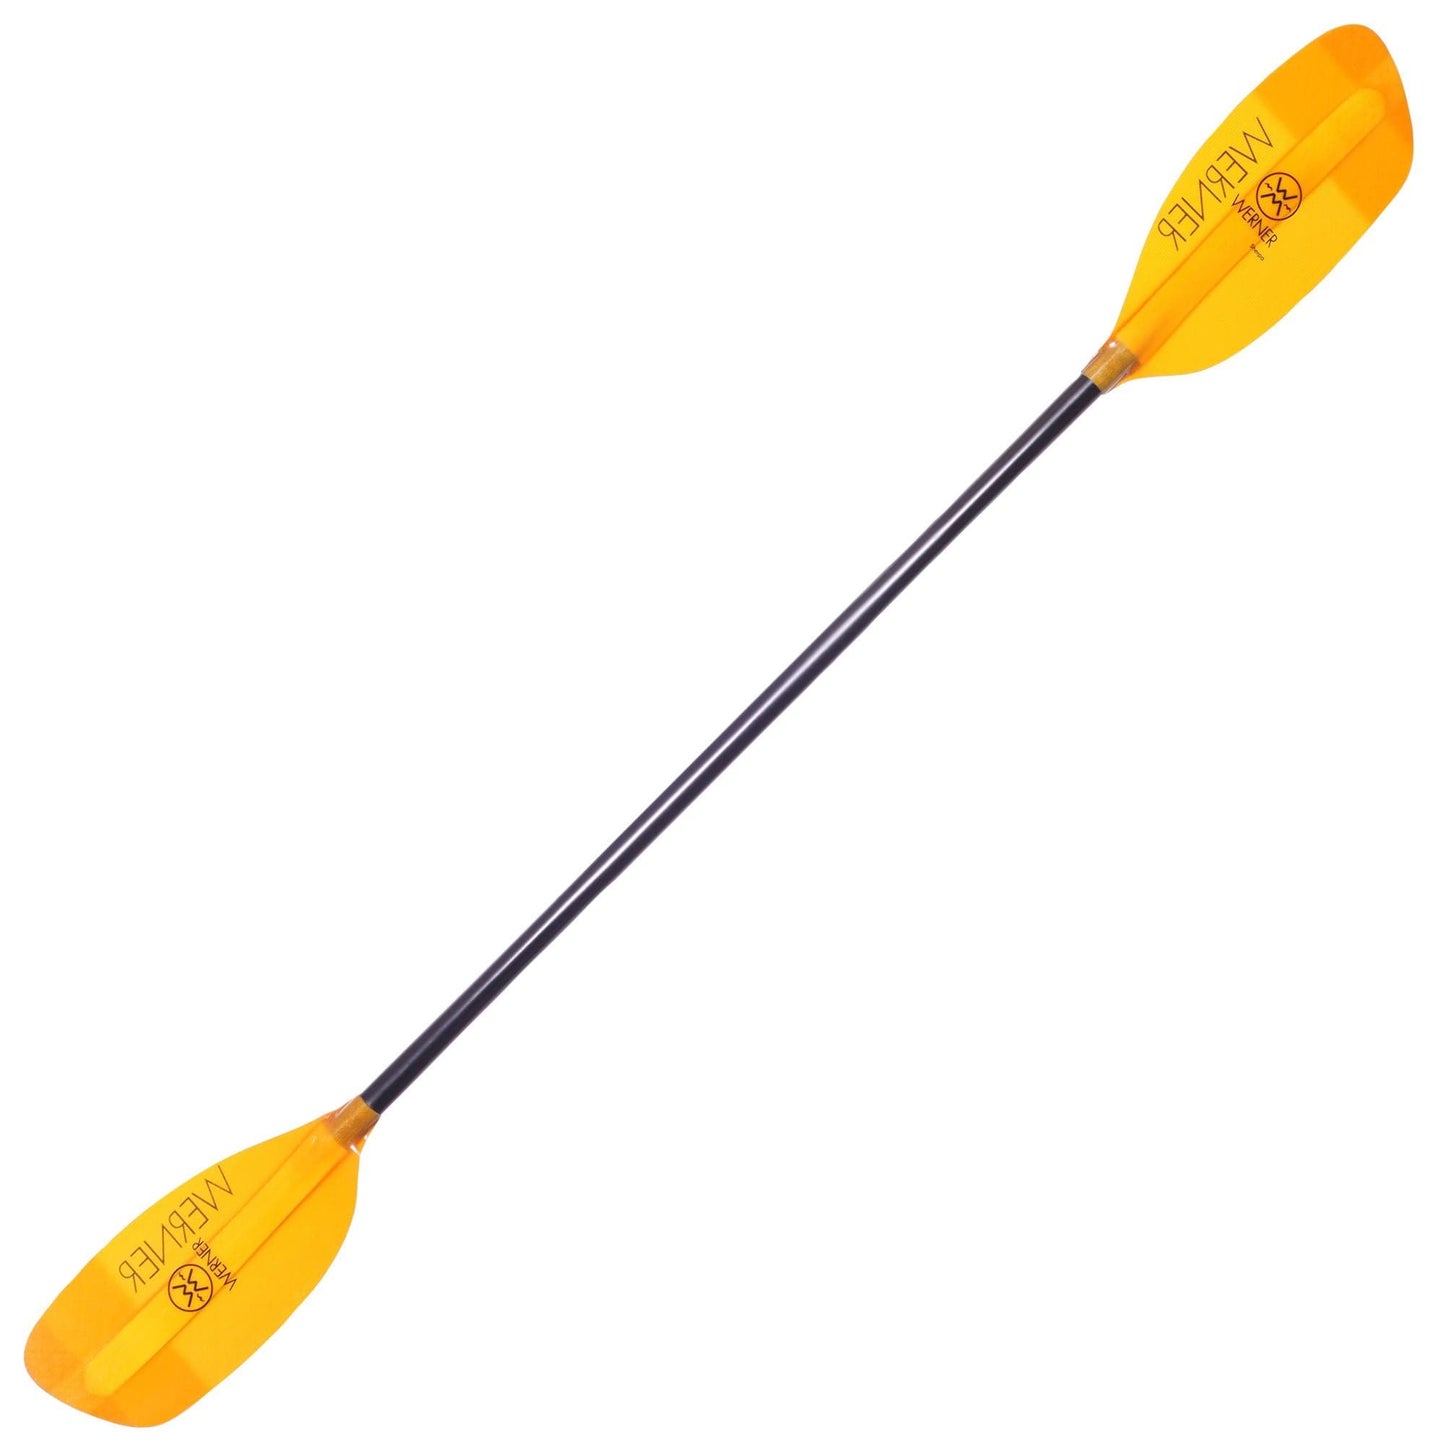 Featuring the Sherpa fiberglass whitewater paddle manufactured by Werner shown here from a third angle.